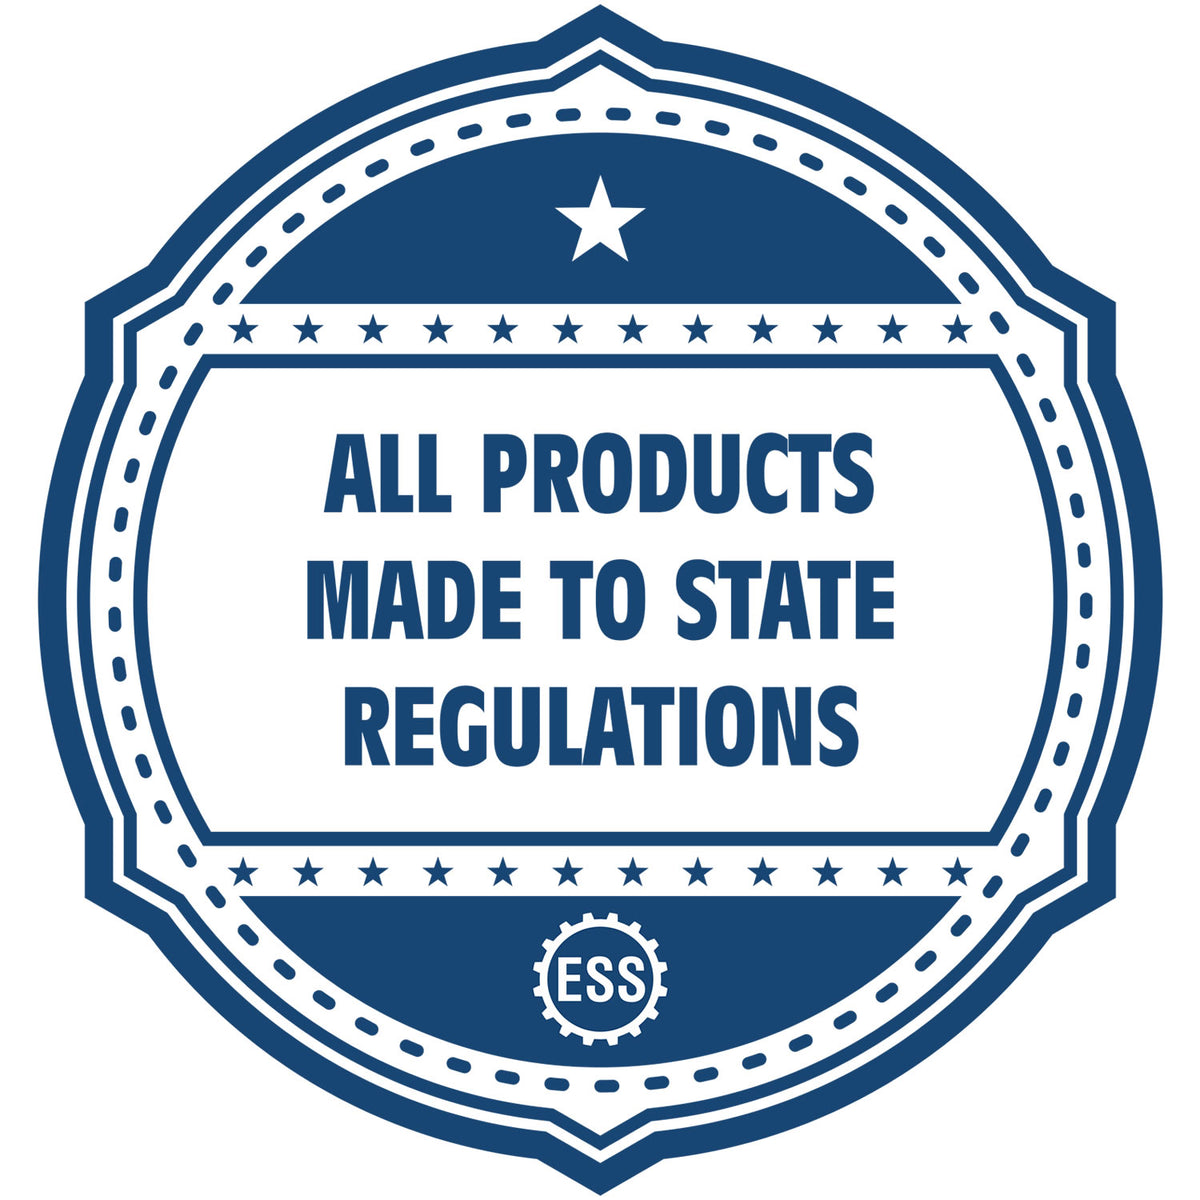 An icon or badge element for the Digital Louisiana PE Stamp and Electronic Seal for Louisiana Engineer showing that this product is made in compliance with state regulations.